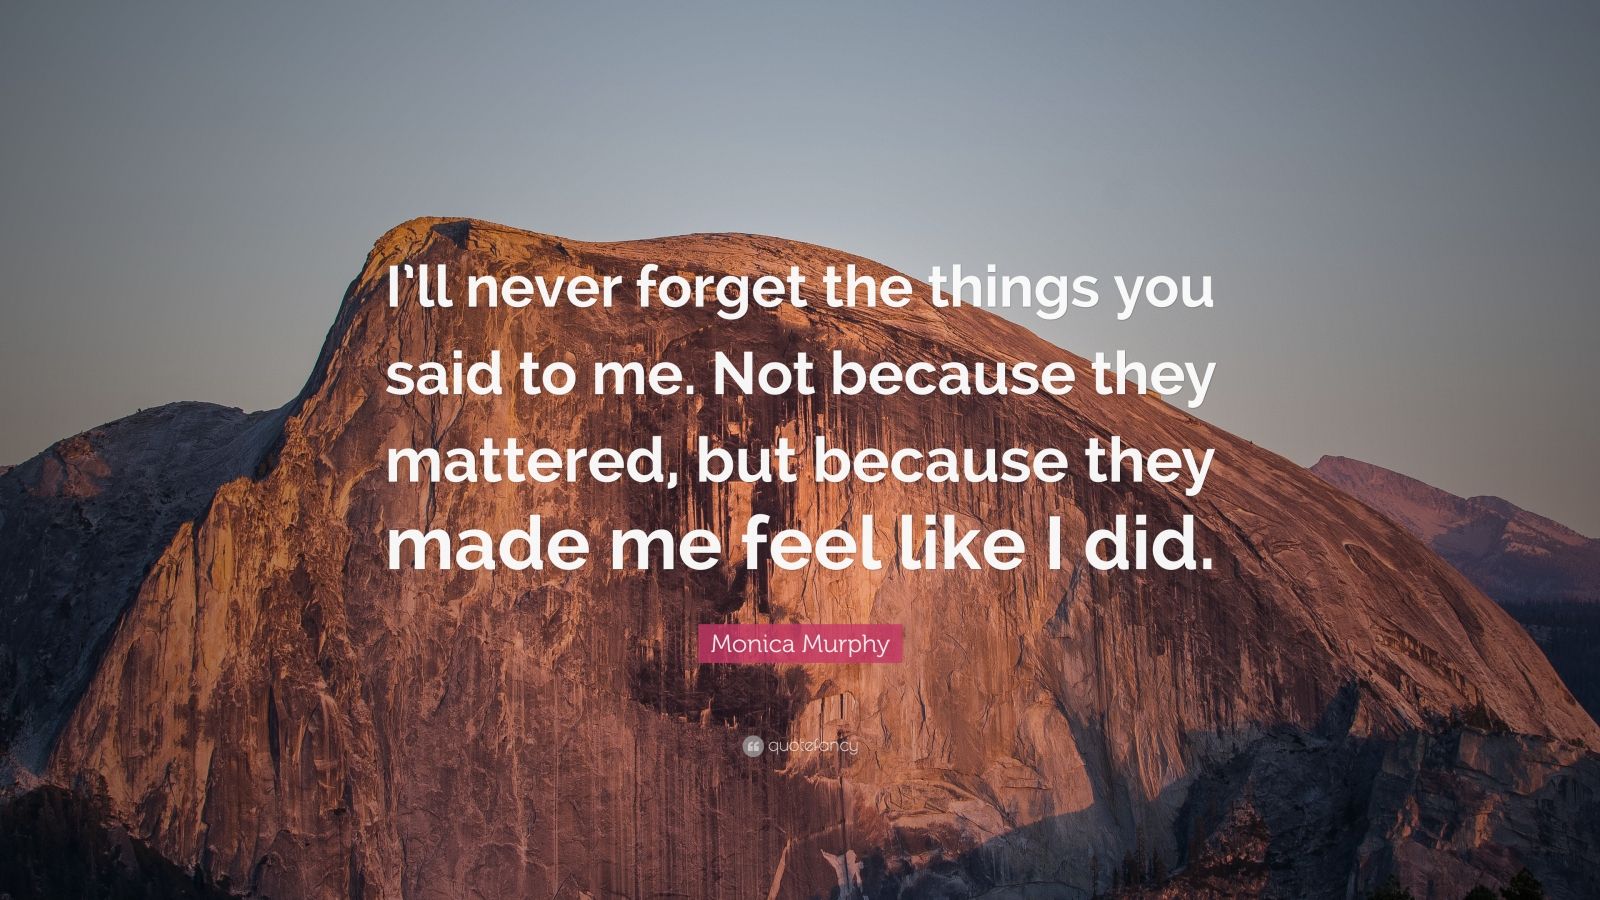 Monica Murphy Quote: “I’ll never forget the things you said to me. Not ...